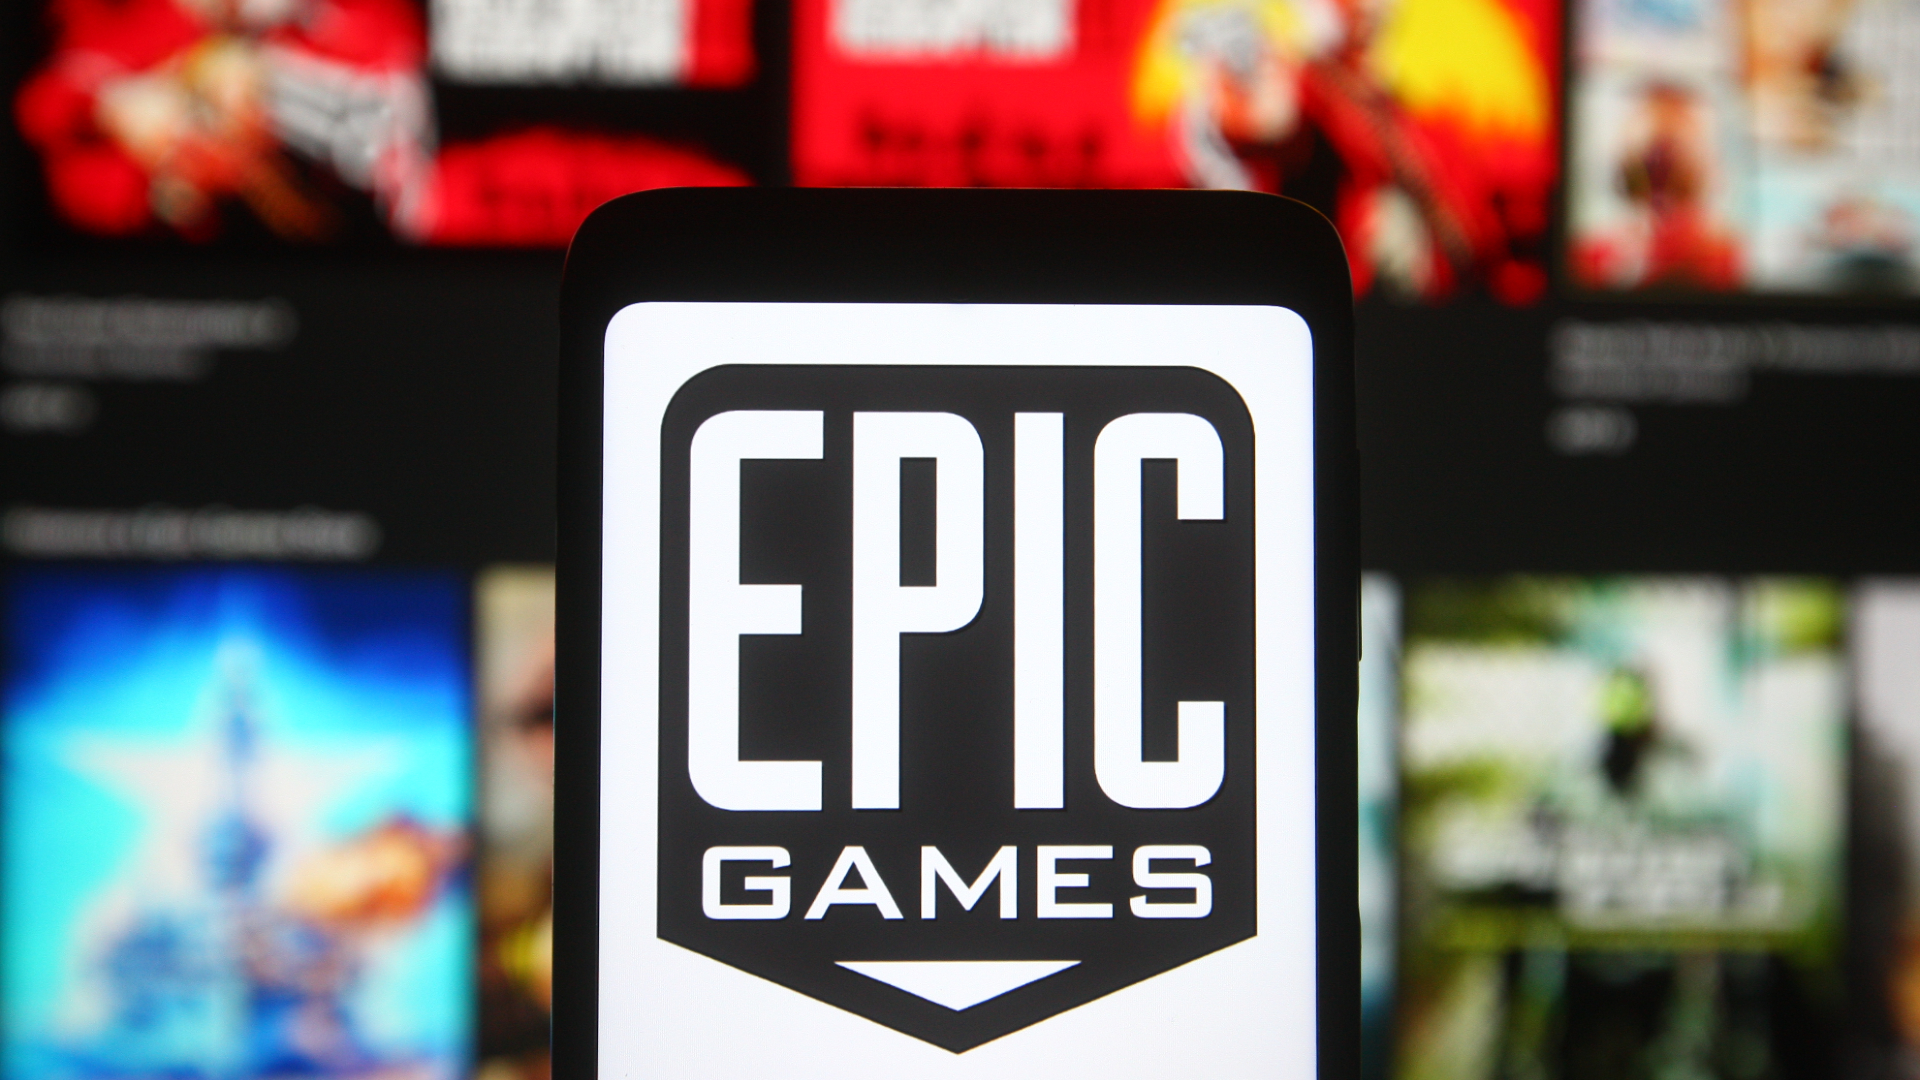 Technical Anshu on LinkedIn: Epic Games Store Reveals Free Games